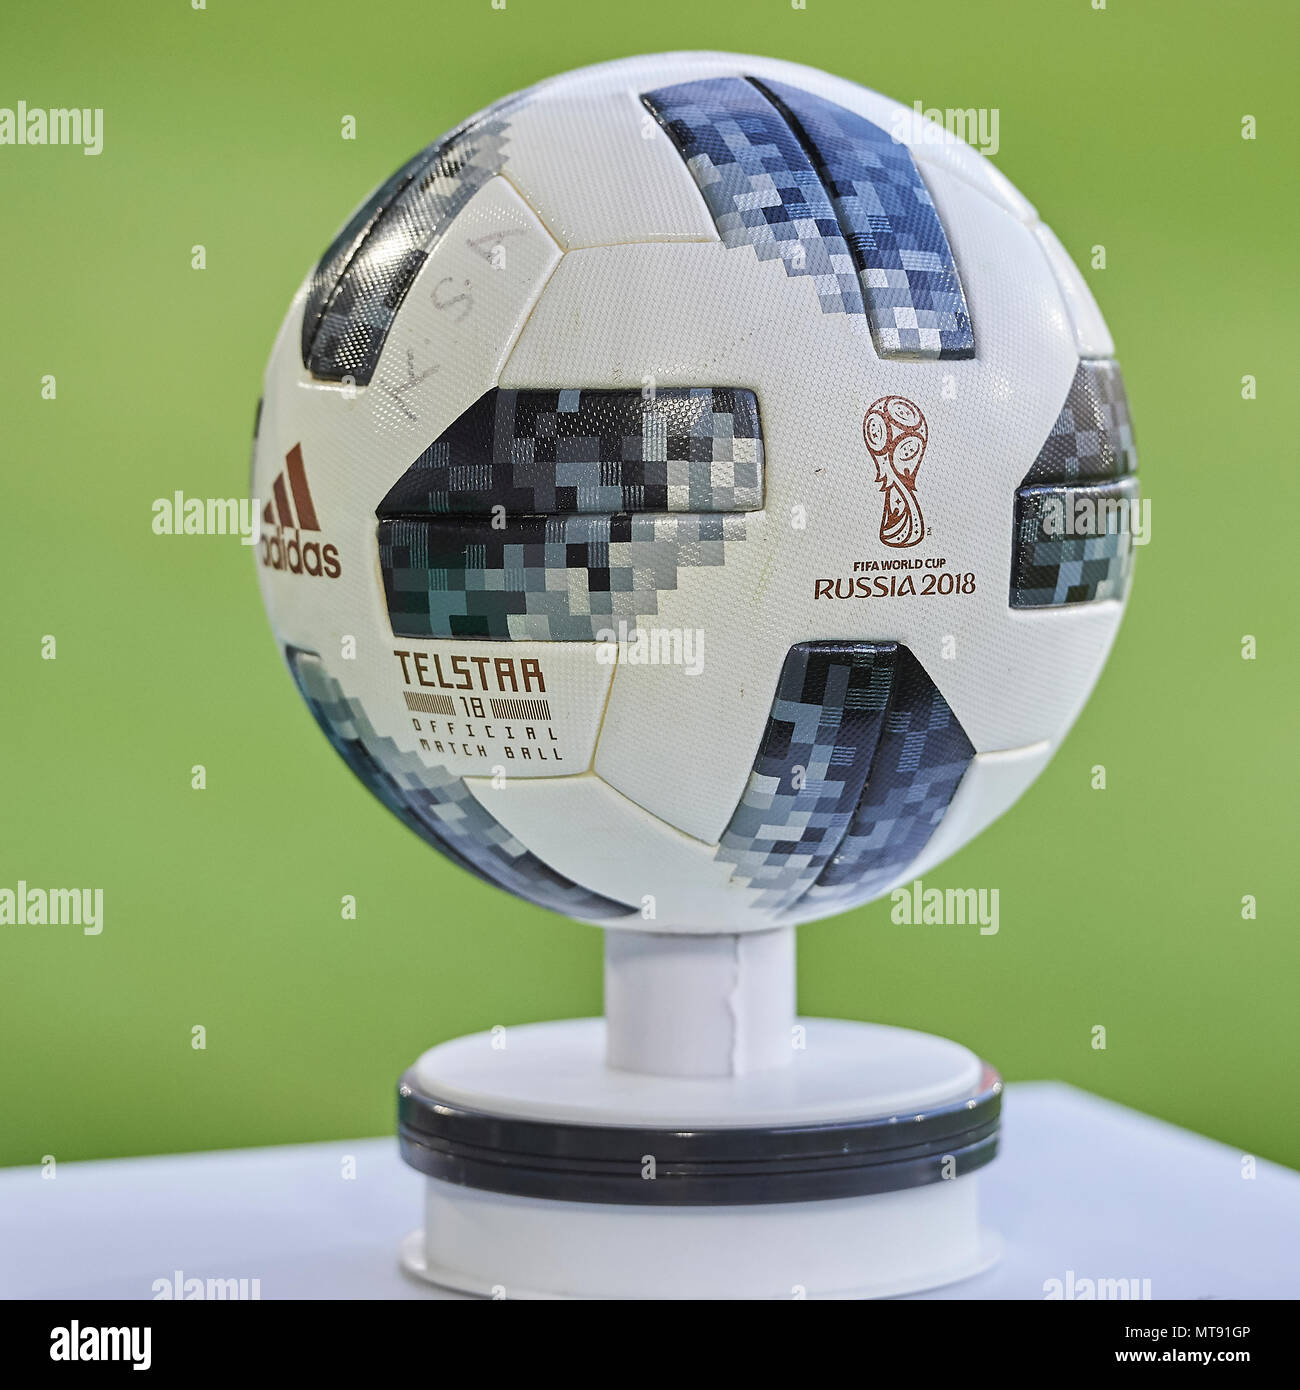 St. Gallen, Switzerland. 28th May 2018. Official match ball for the football World Cup 2018 preparation match Italy vs. Saudi Arabia in St. Gallen. The national team from Saudi Arabia is using the game to prepare for the 2018 FIFA World Cup final tournament in Russia while Italy did not qualify for the World Cup finals. Stock Photo